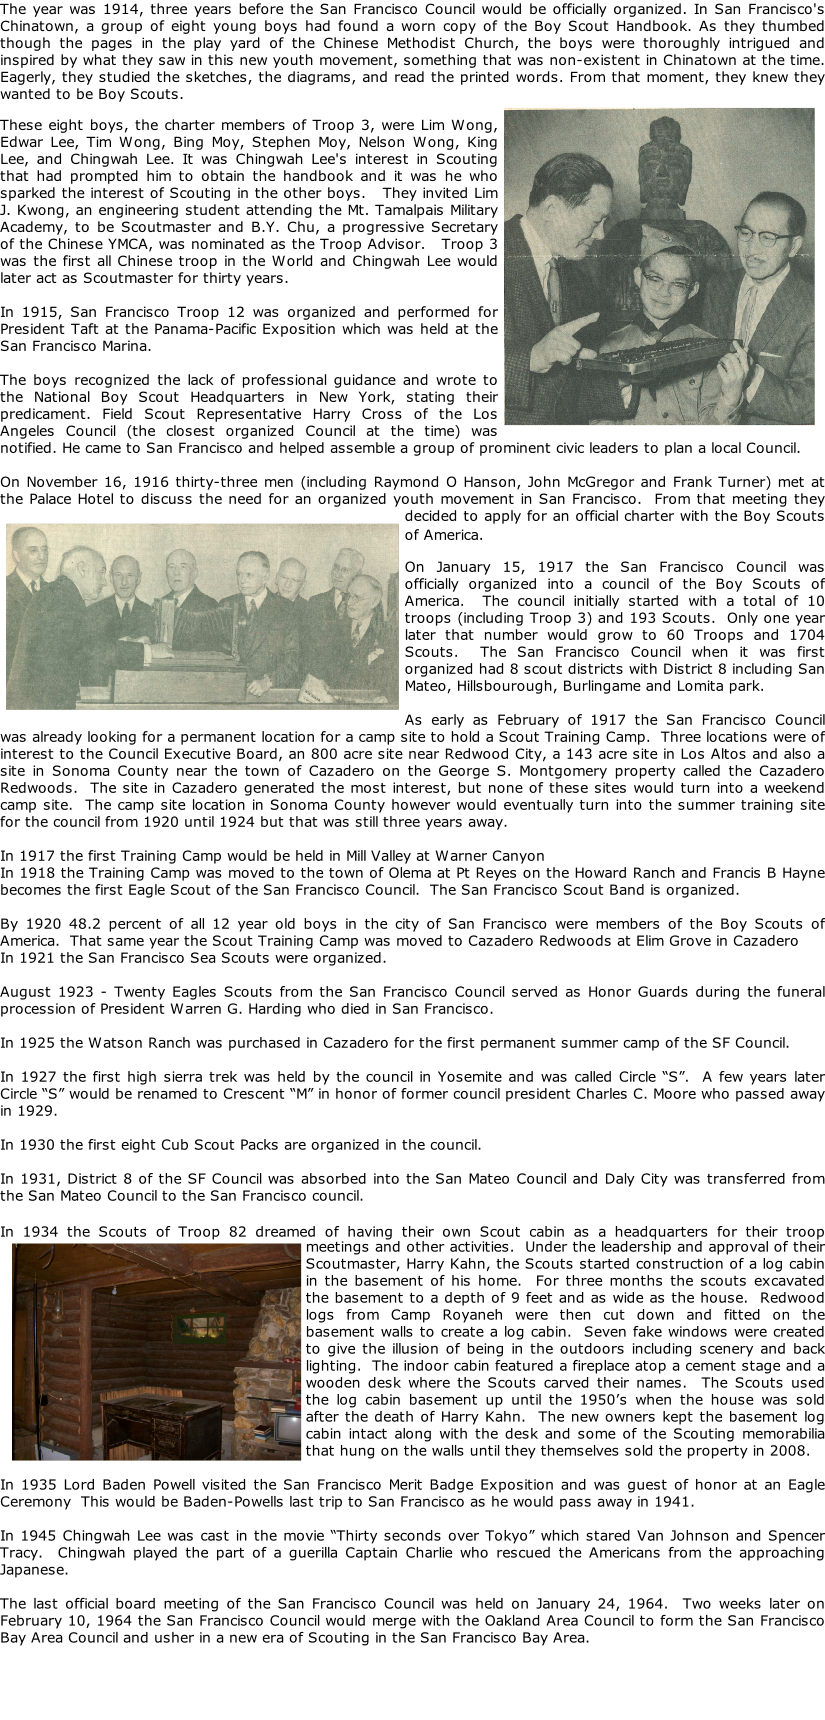 Founding members of the San Francisco Council (c 1941)